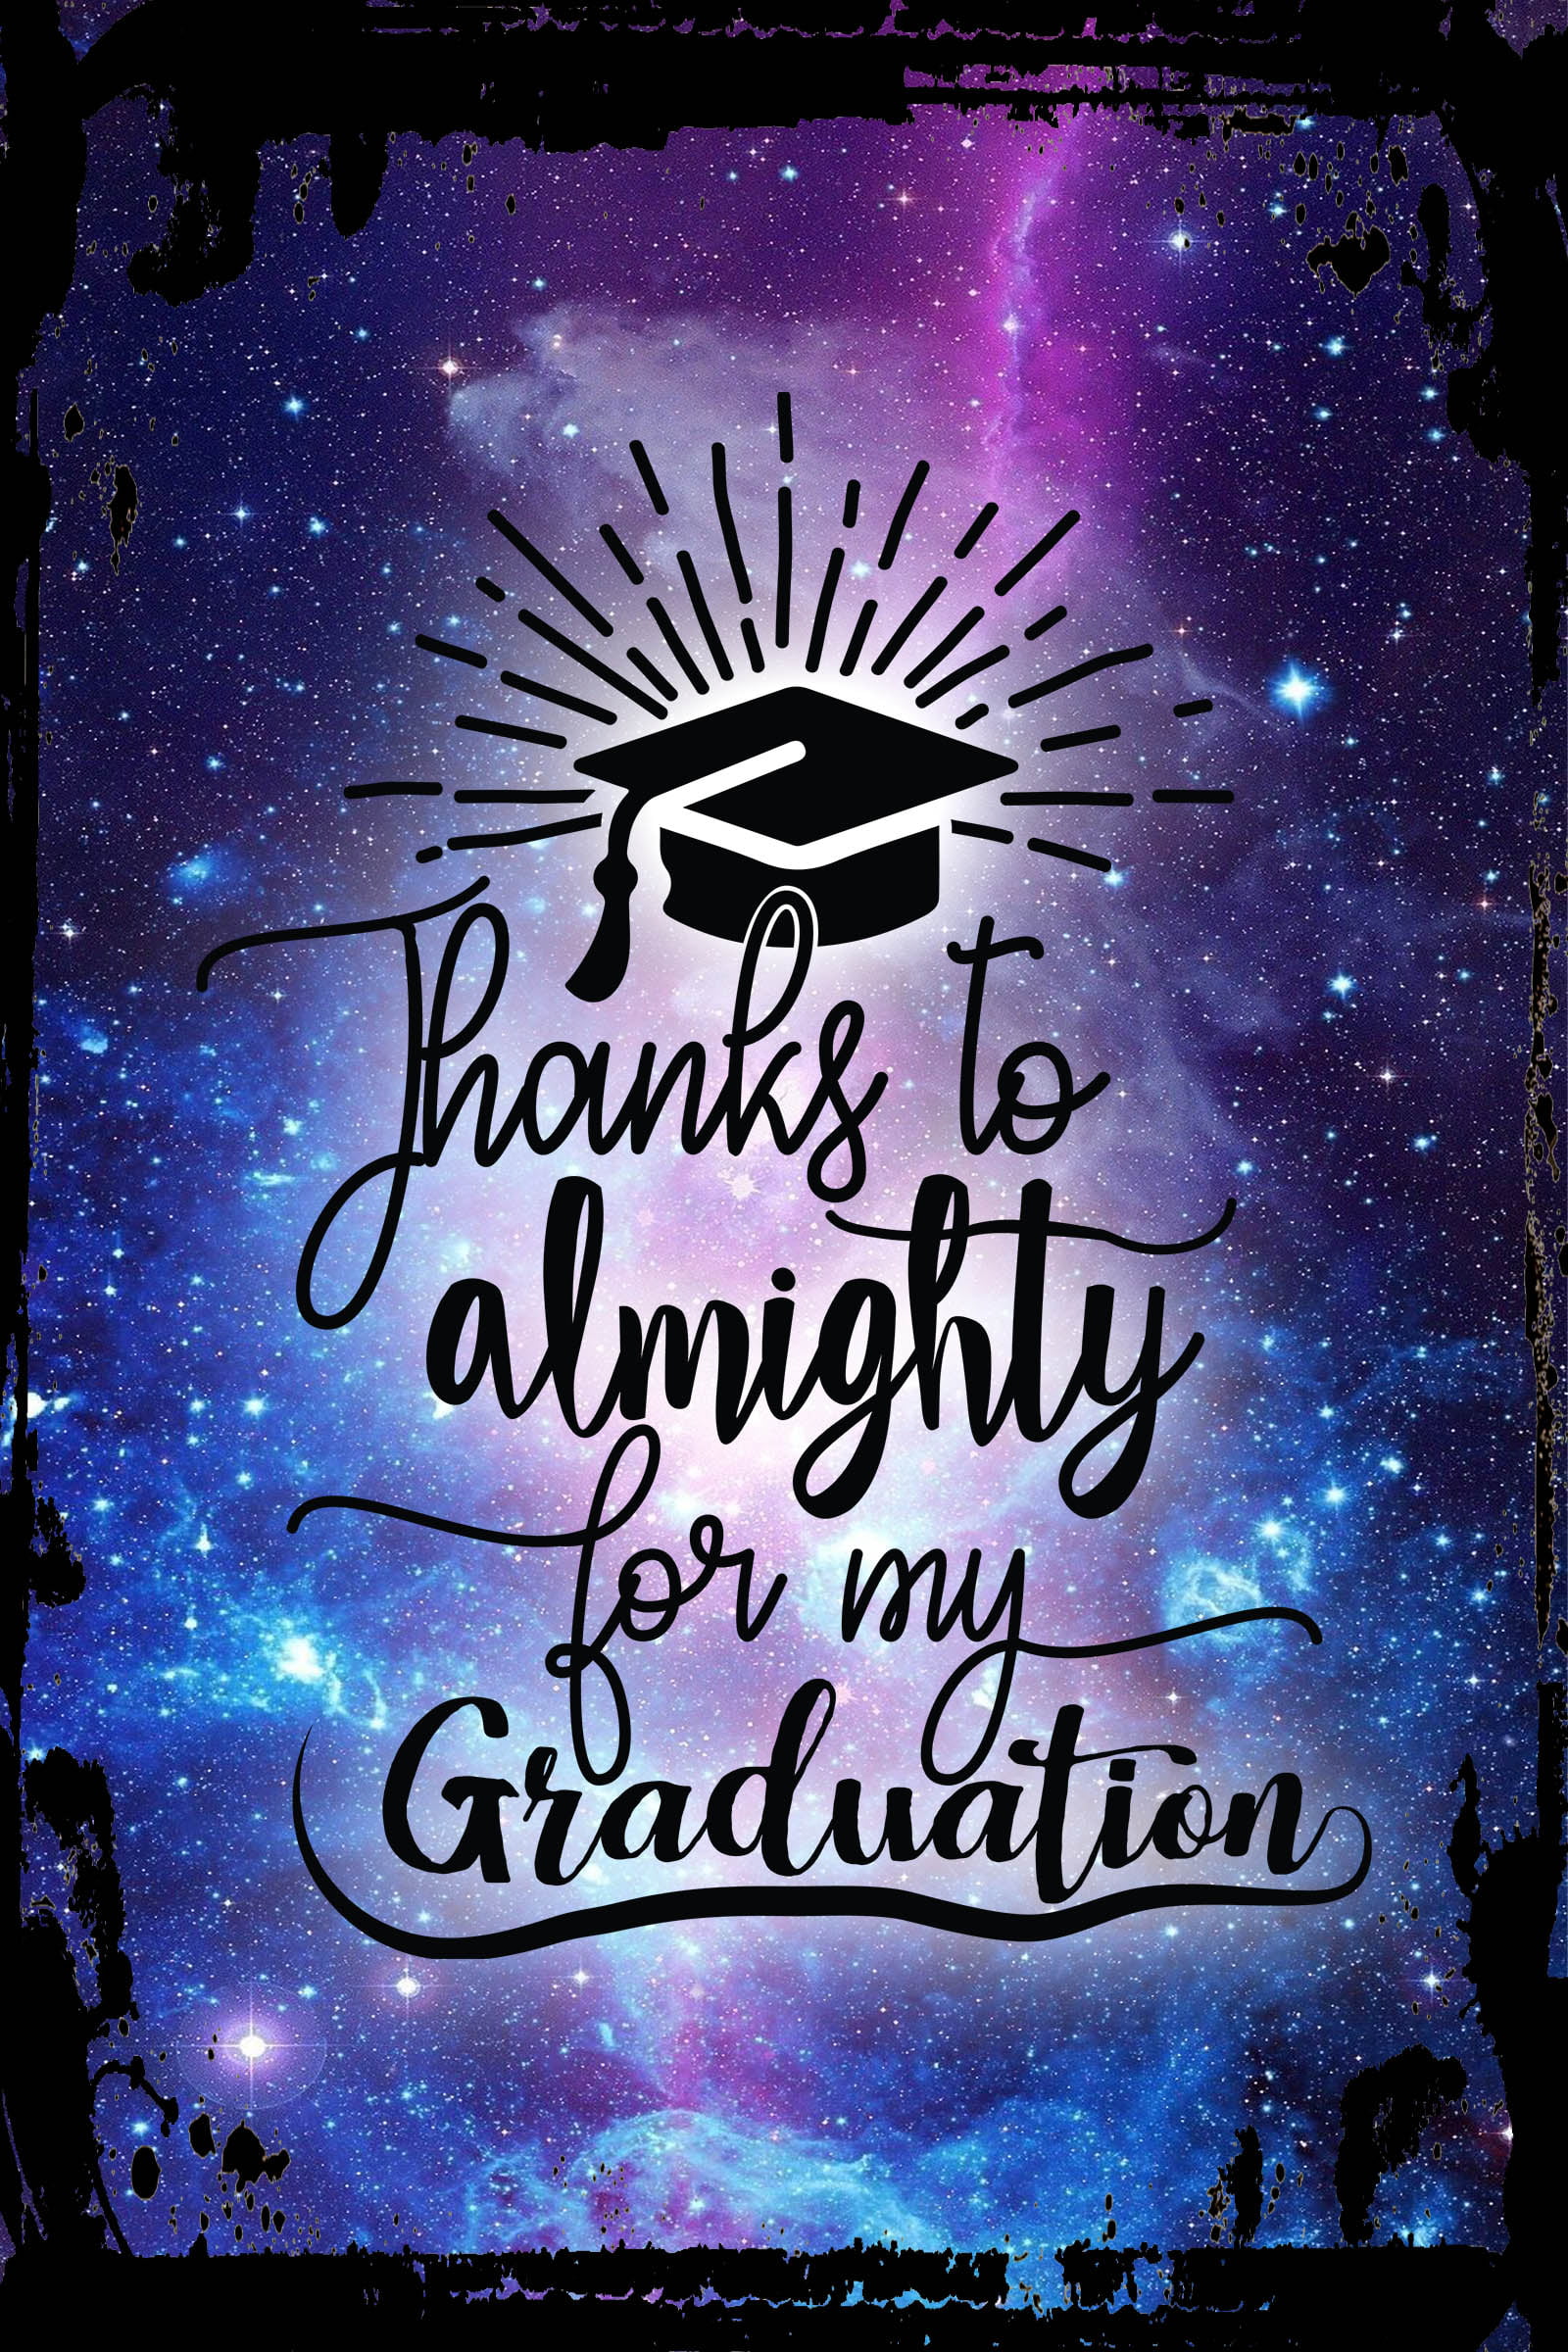 Galaxy Inspirational Wall Art Thanks to Almighty for my Graduation Cap  Metal Wall Art Decor Funny Gift 